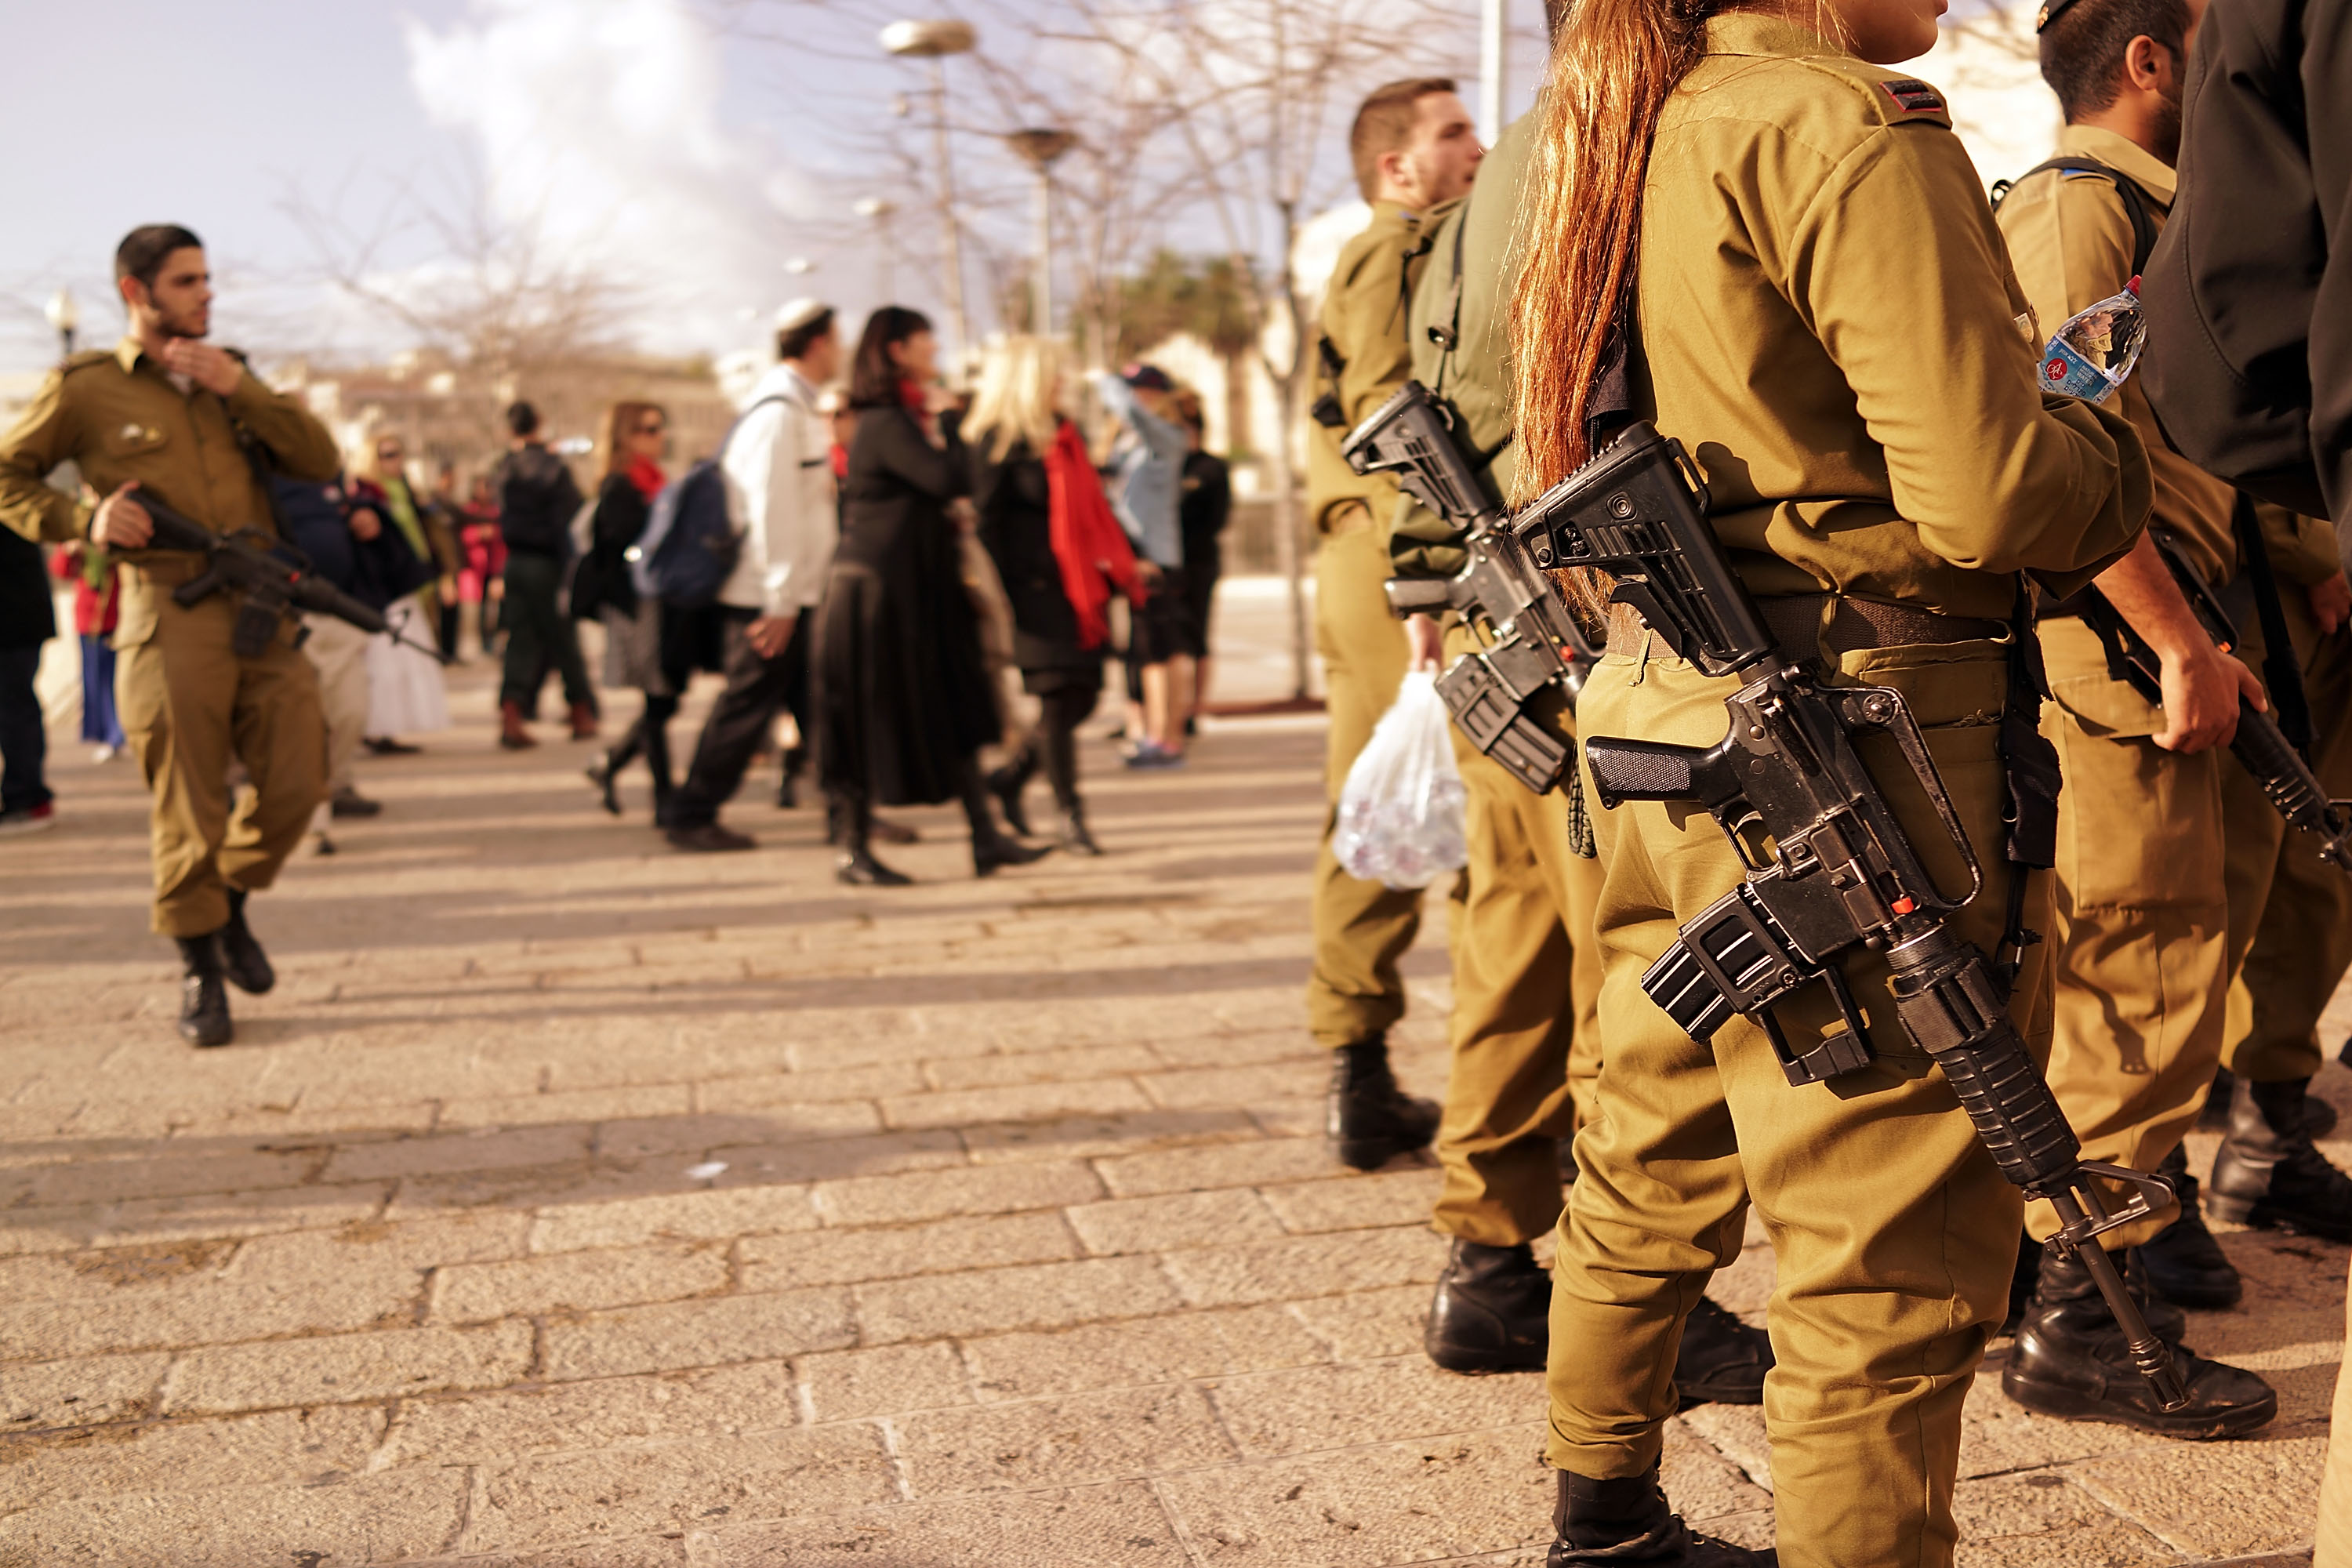 JERUSALEM, ISRAEL - NOVEMBER 28: Young members of the Israeli Defense Forces (IDF) pause in a park near the Old City on November 28, 2014 in Jerusalem, Israel. (Spencer Platt/Getty Images)